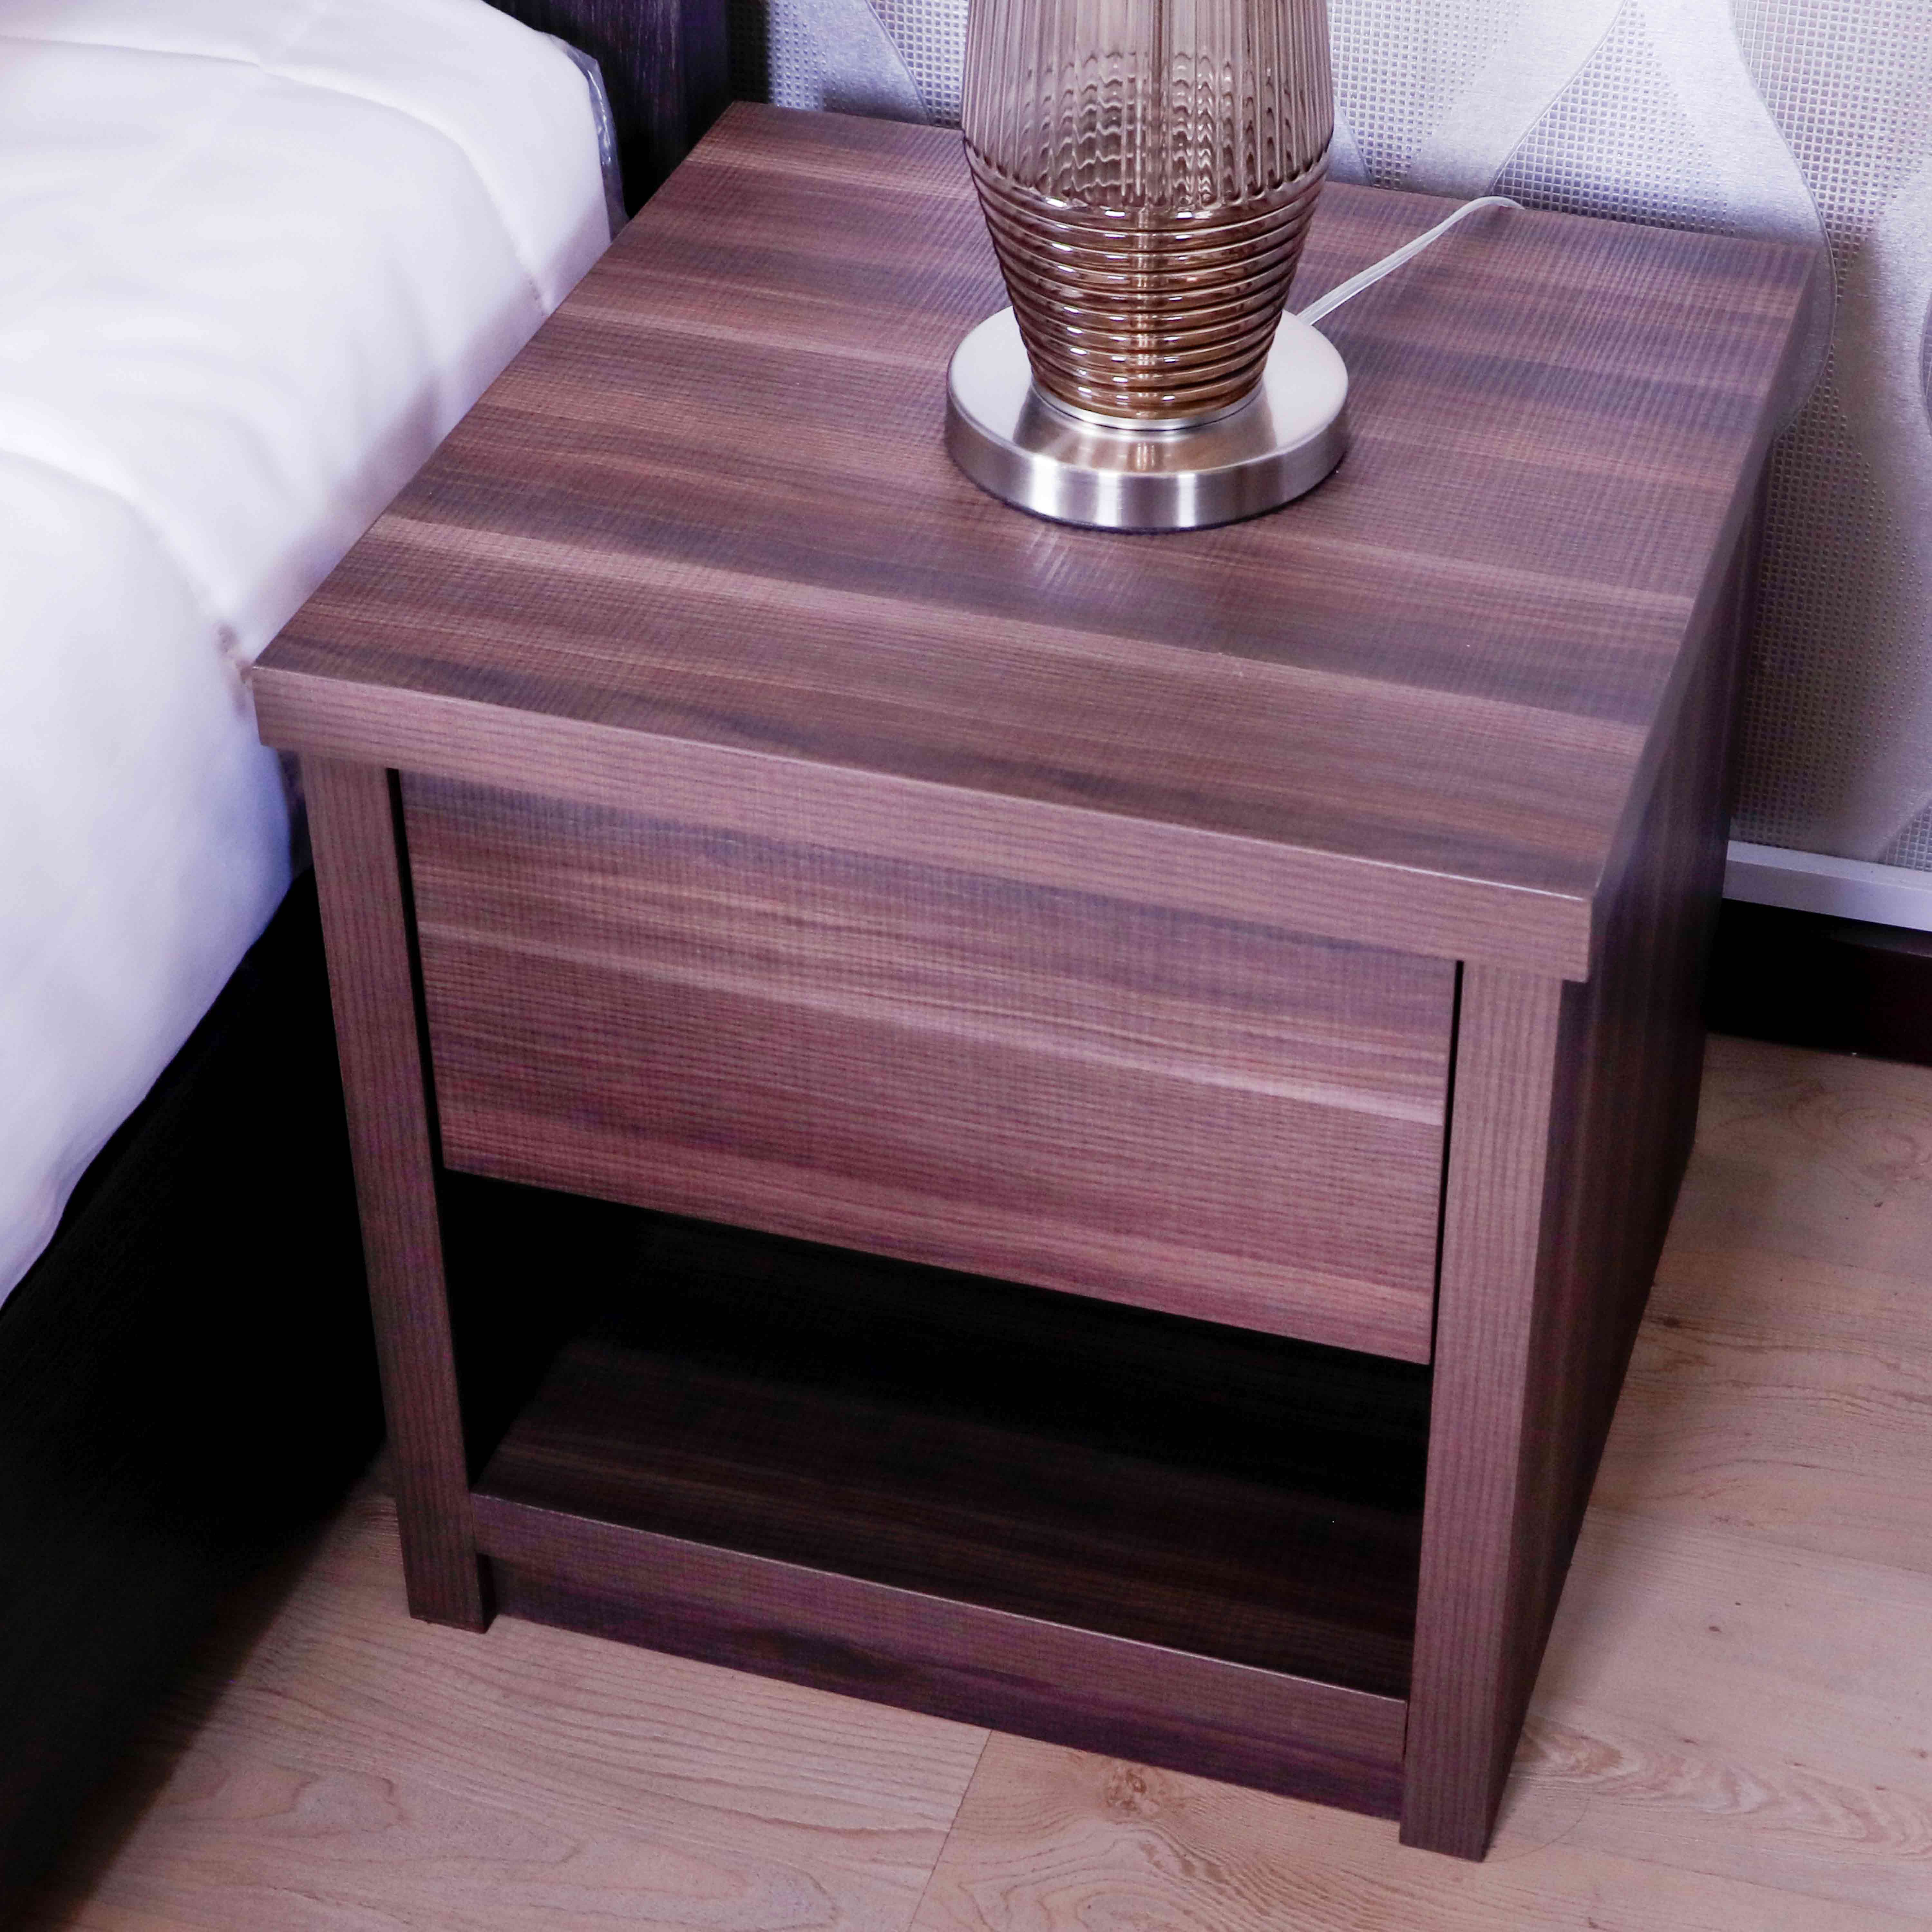 BED SIDE TABLE 9866 W500XH500XD500 MM FRESNOTEA